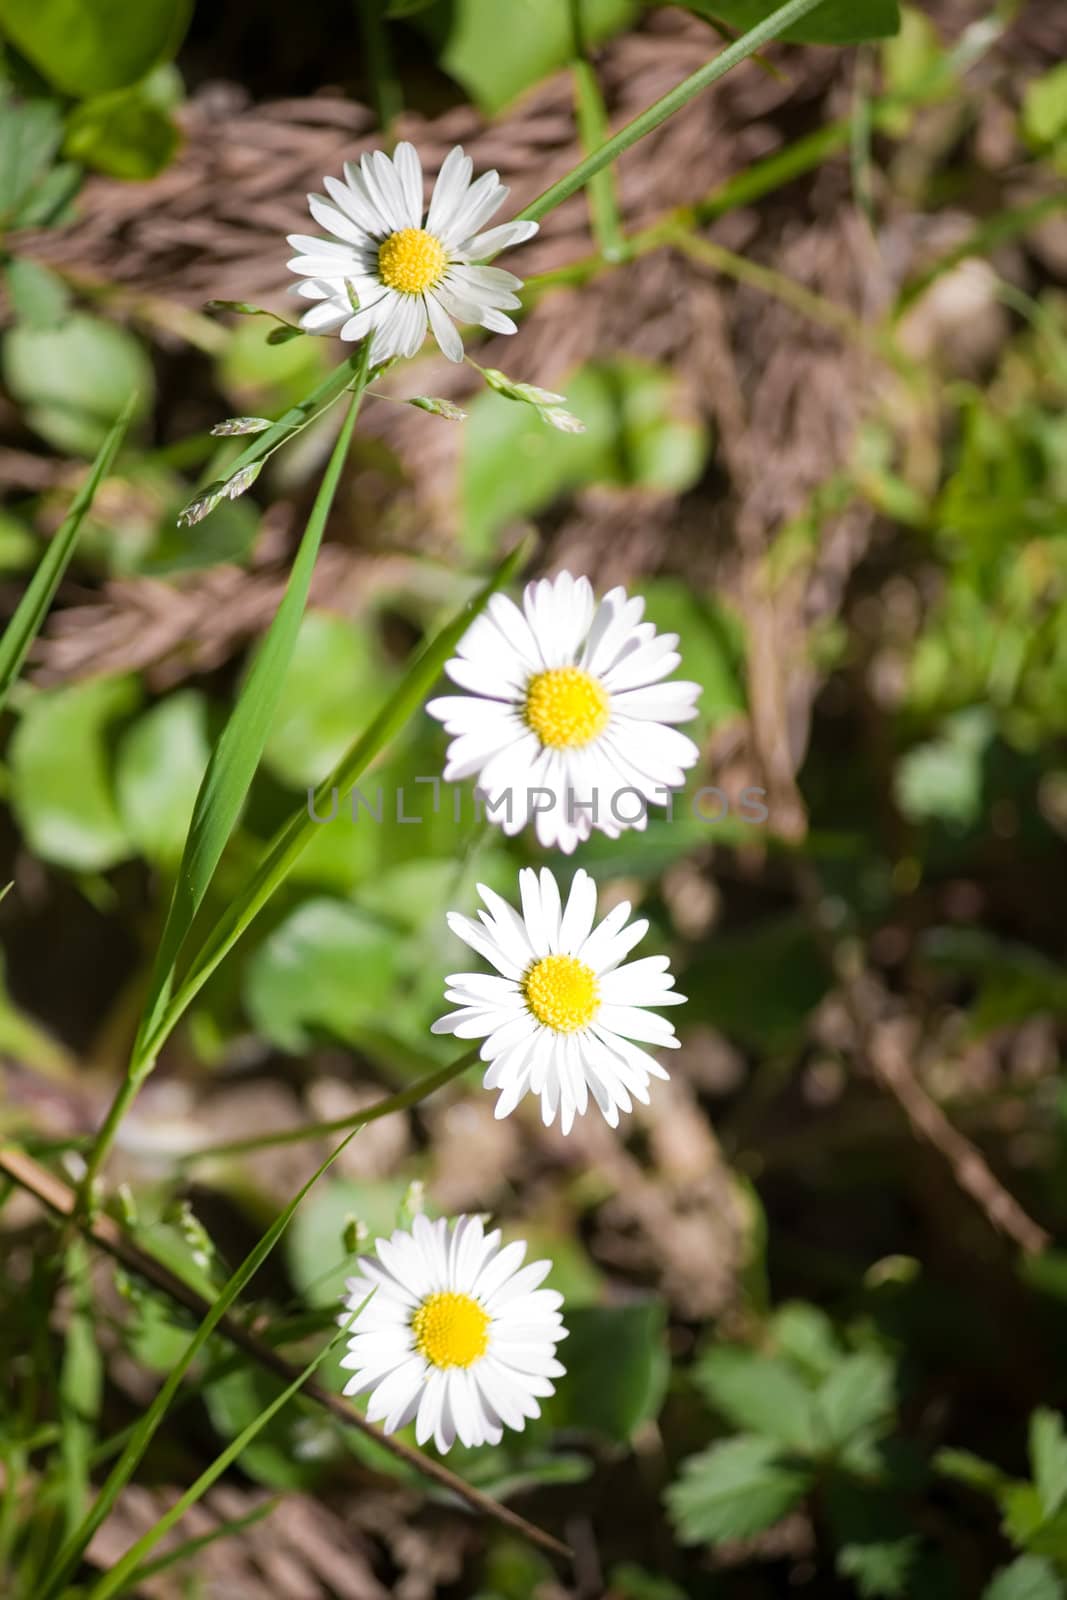 beautiful daisy flowers blooming in the sunshine